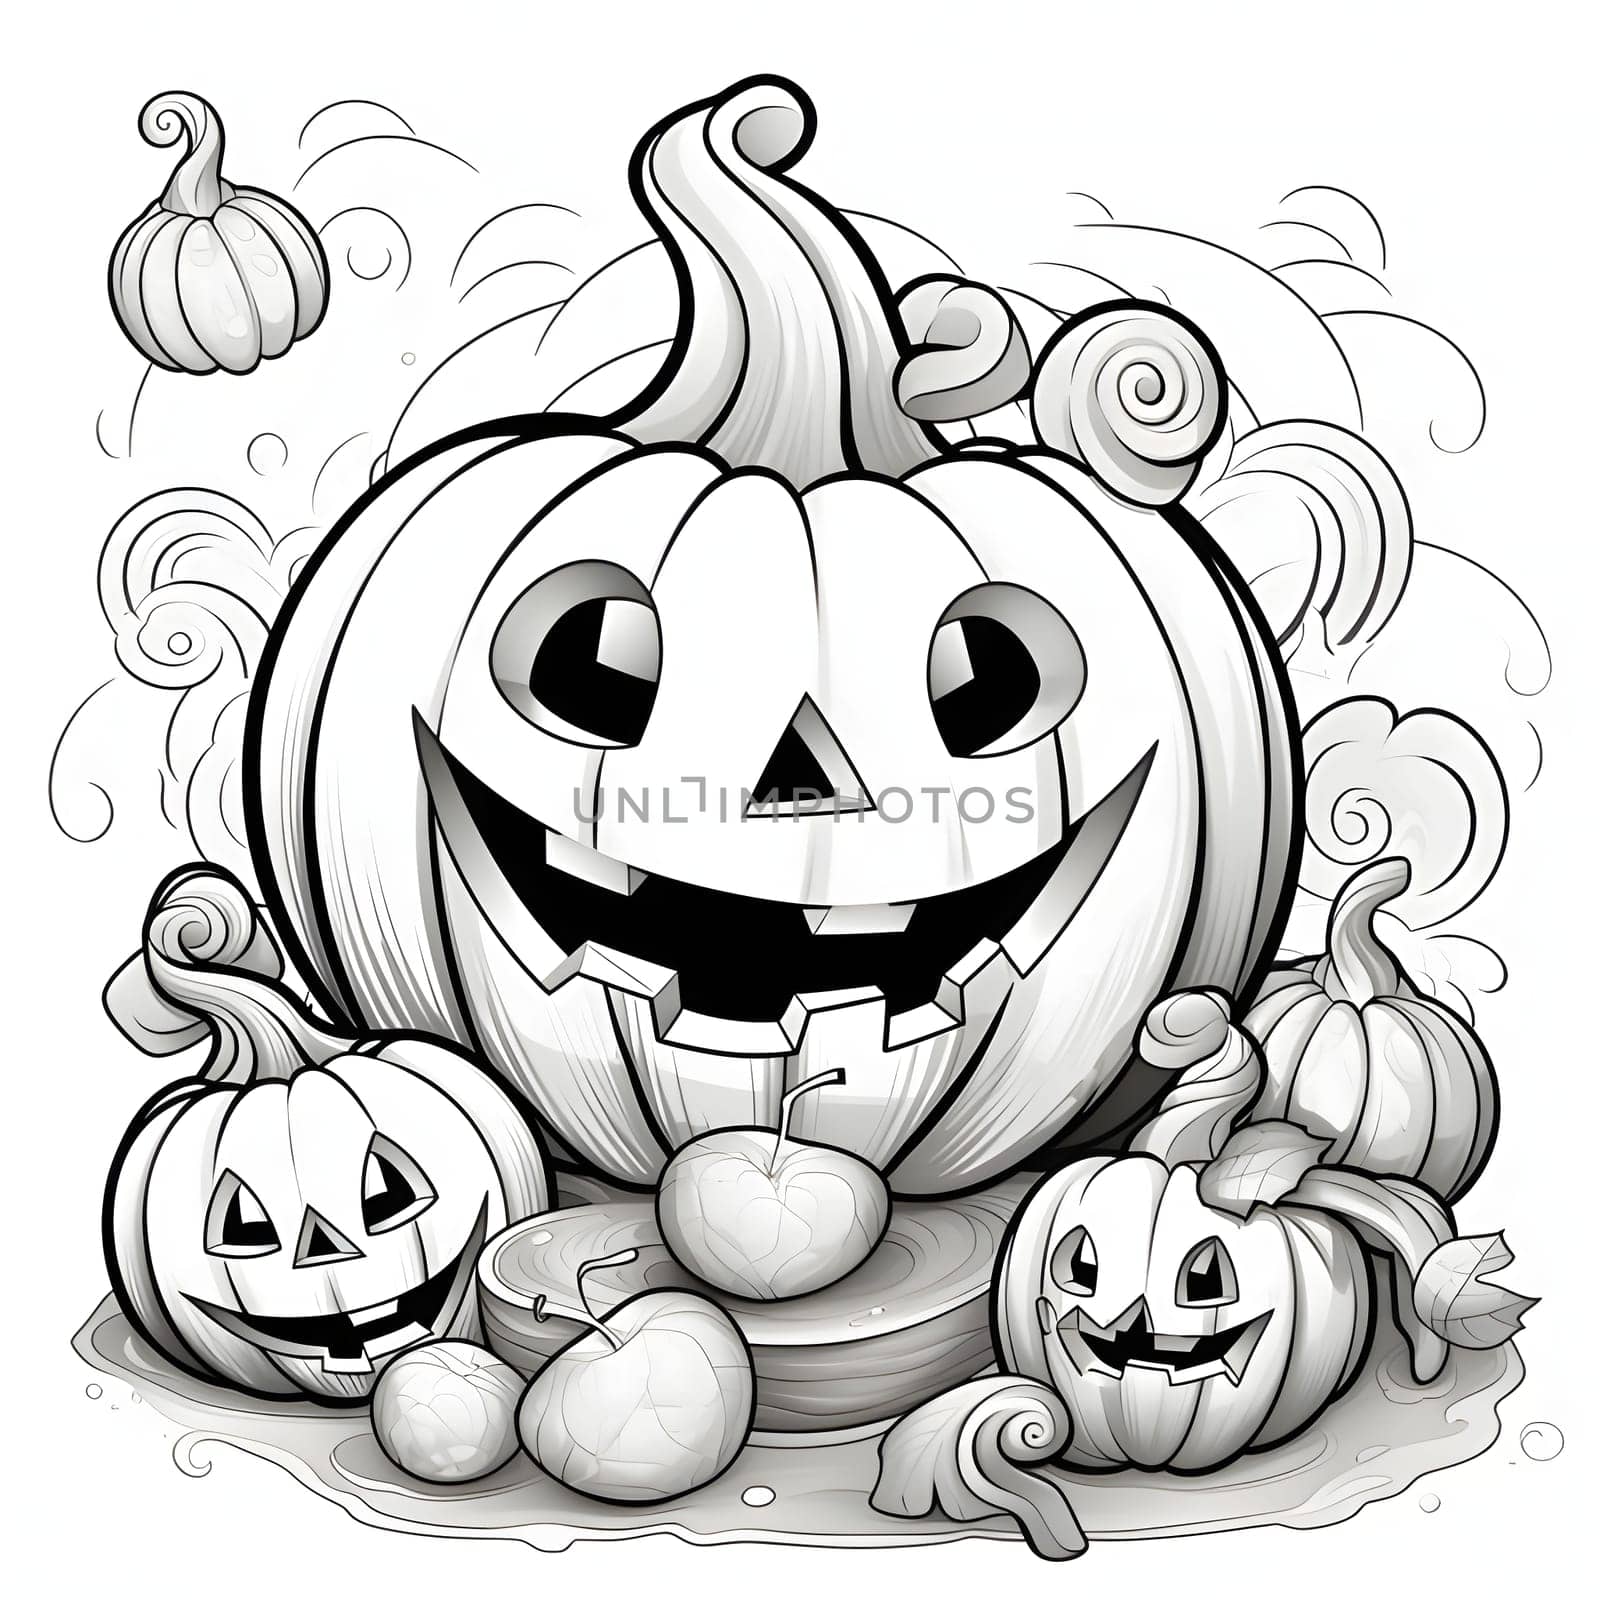 Three cheerful jack-o-lantern pumpkins and apples, Halloween black and white picture coloring book. Atmosphere of darkness and fear.